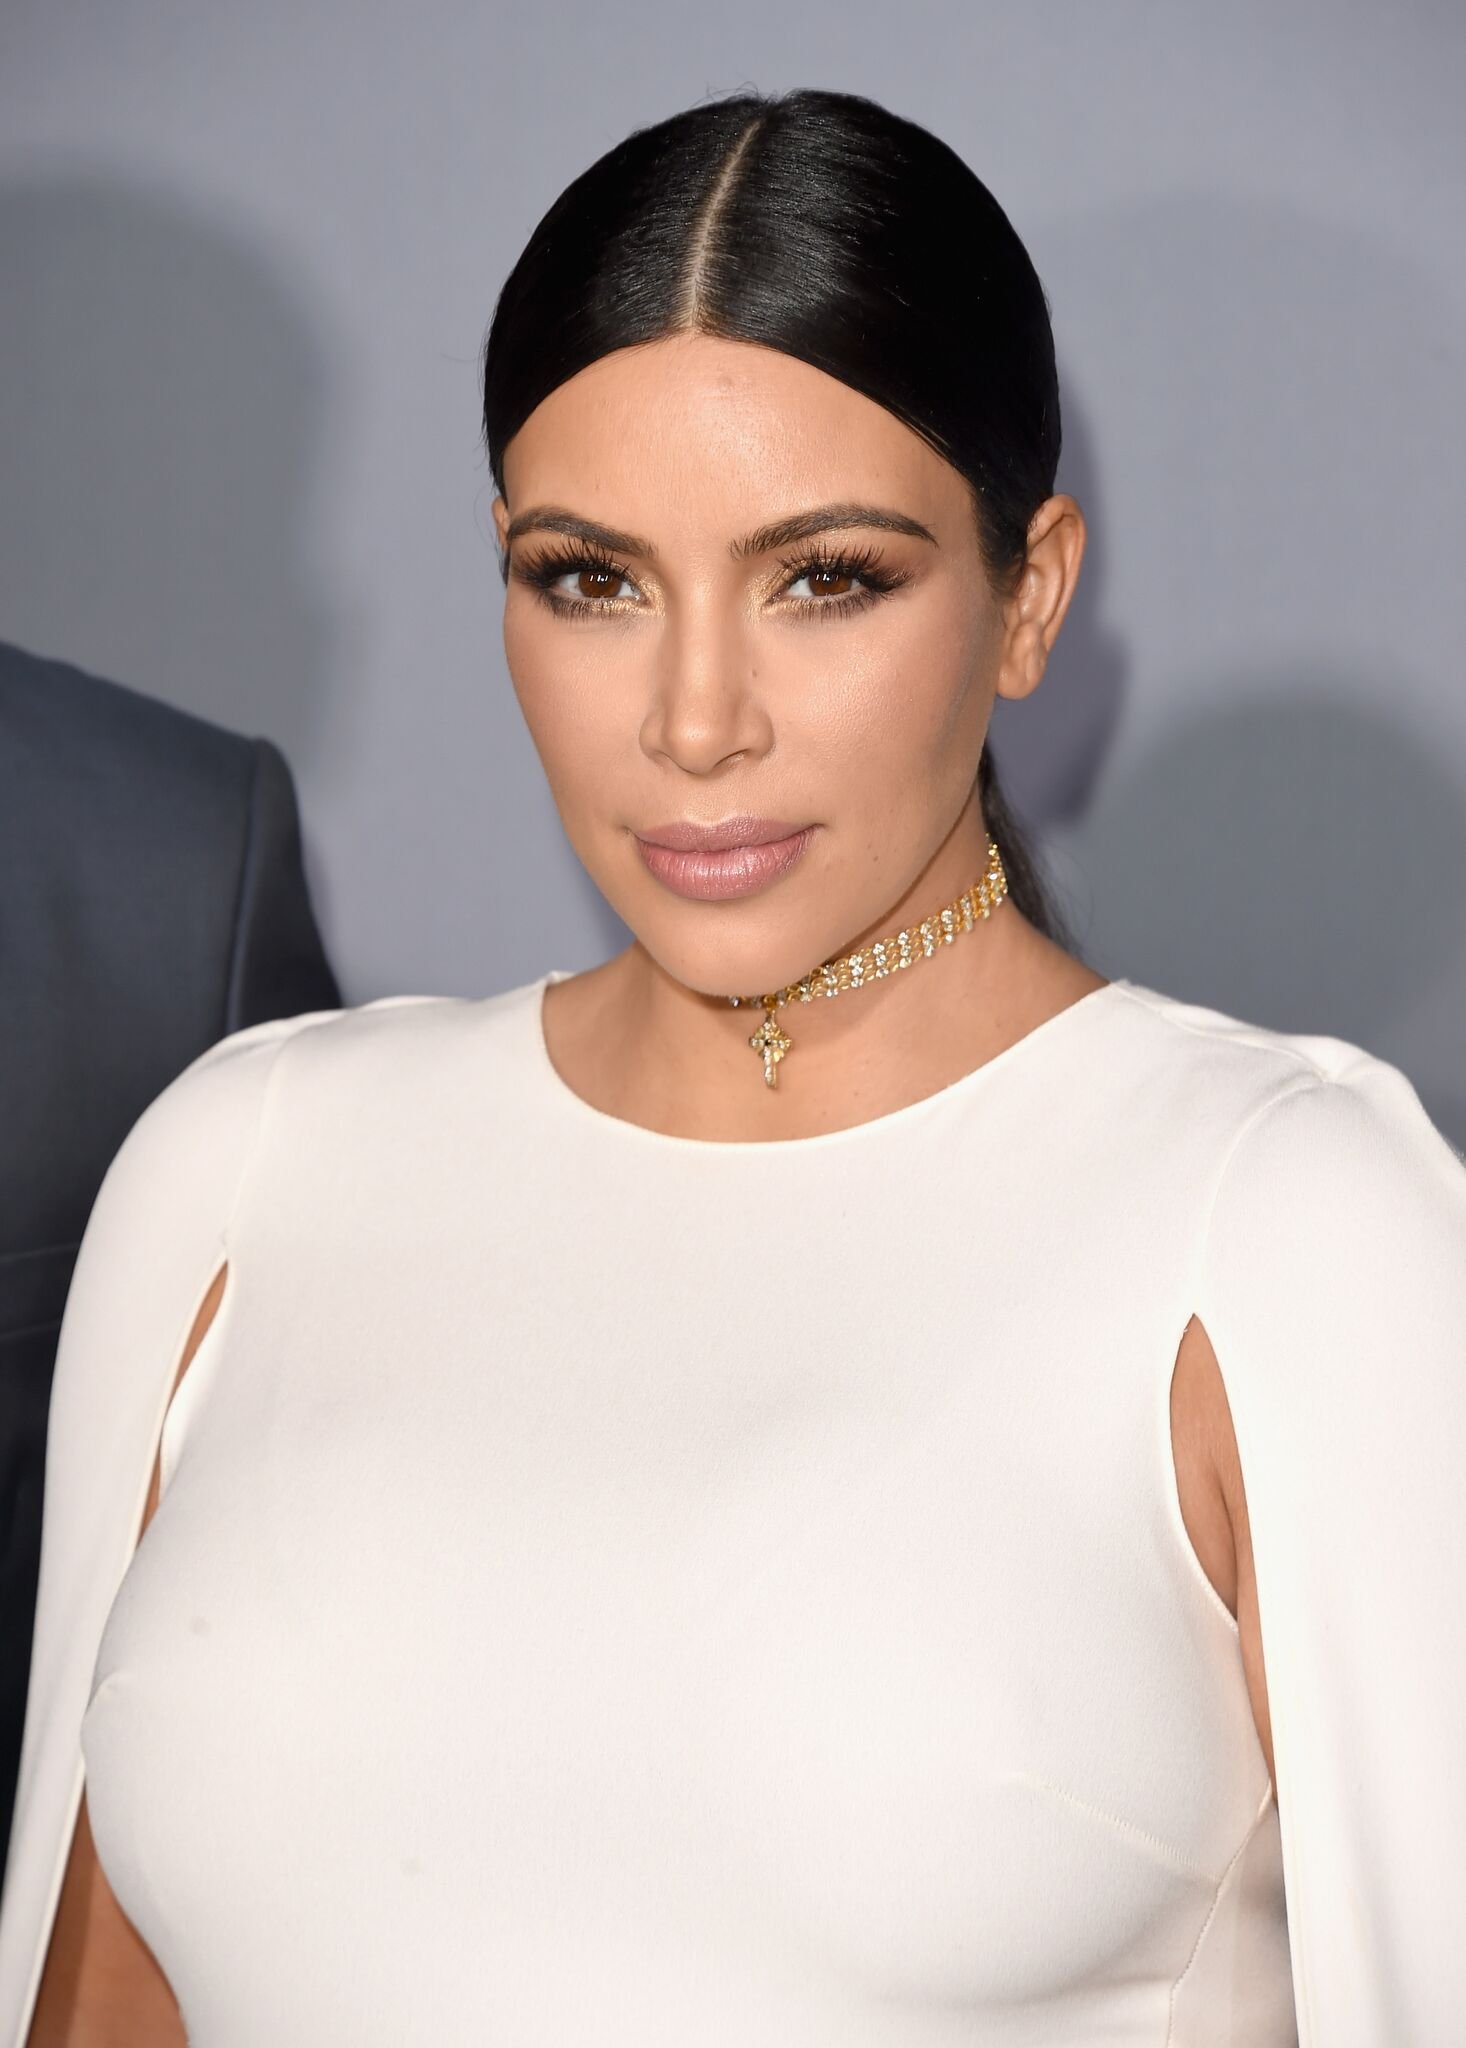 Kim Kardashian at the InStyle Awards at Getty Center on October 26, 2015 | Photo: Getty Images